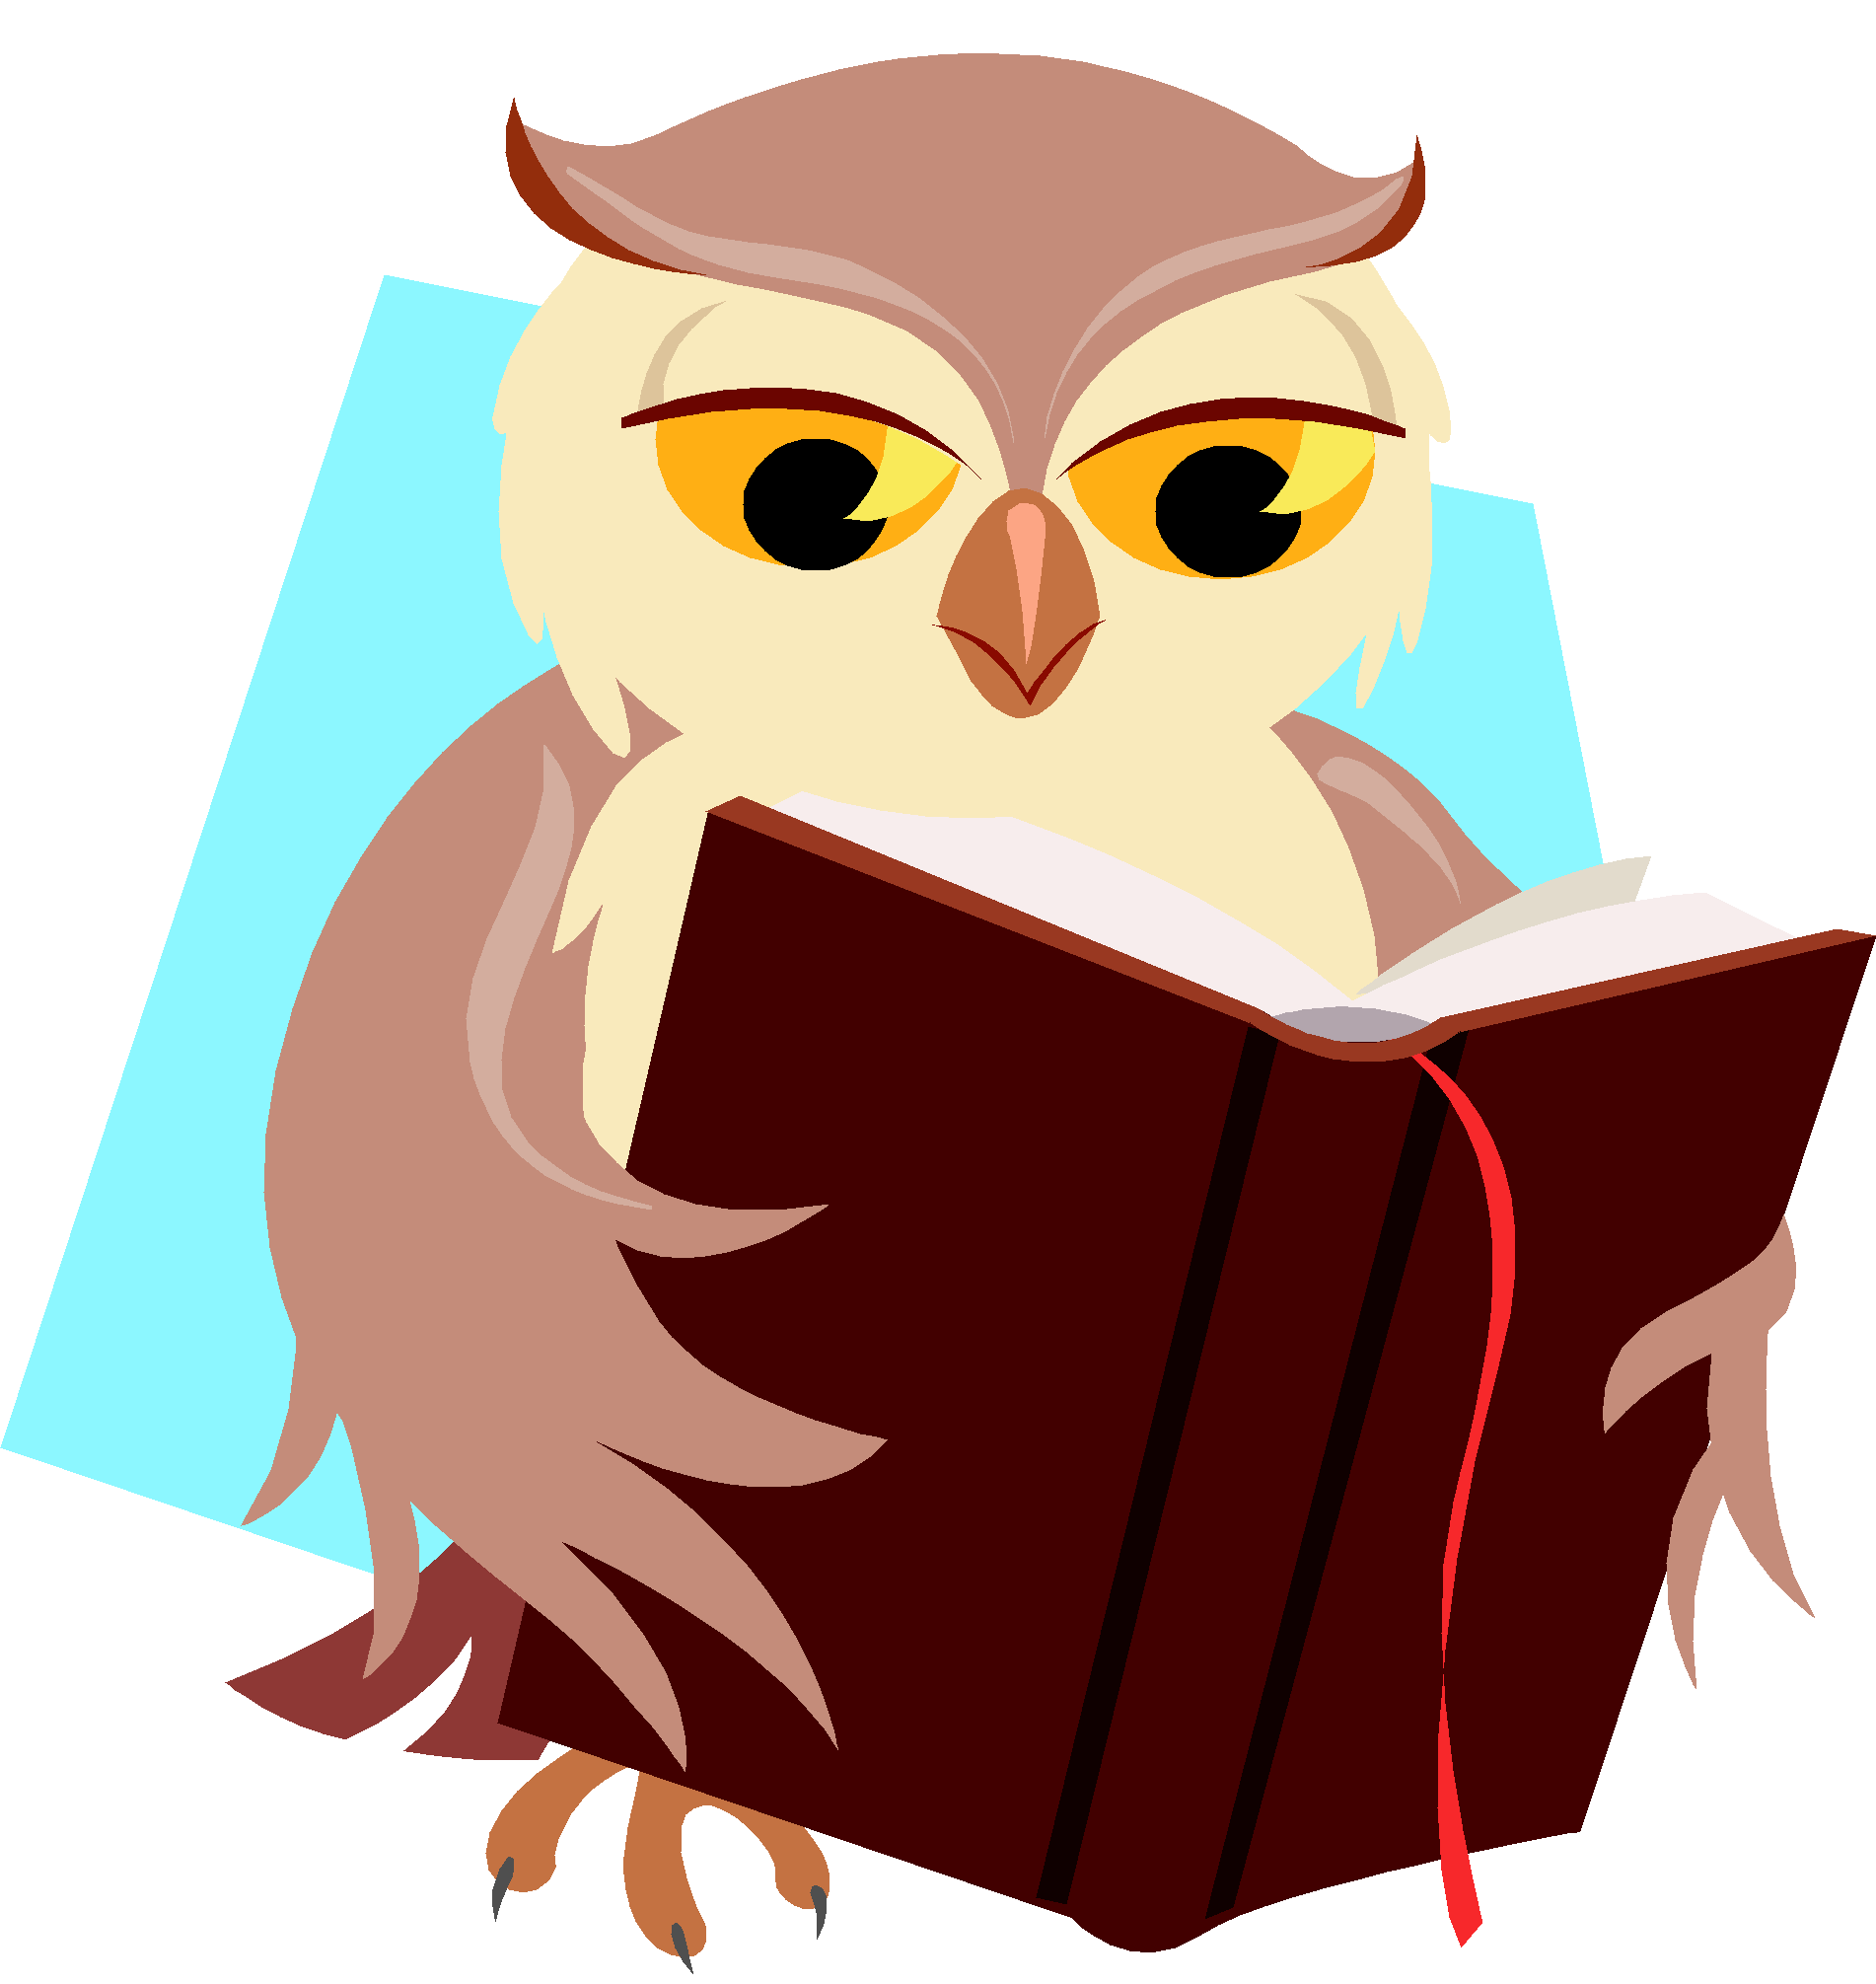 Free Wise Owl Clipart Image - 3357, Wise Owl Clipart ~ Free ...